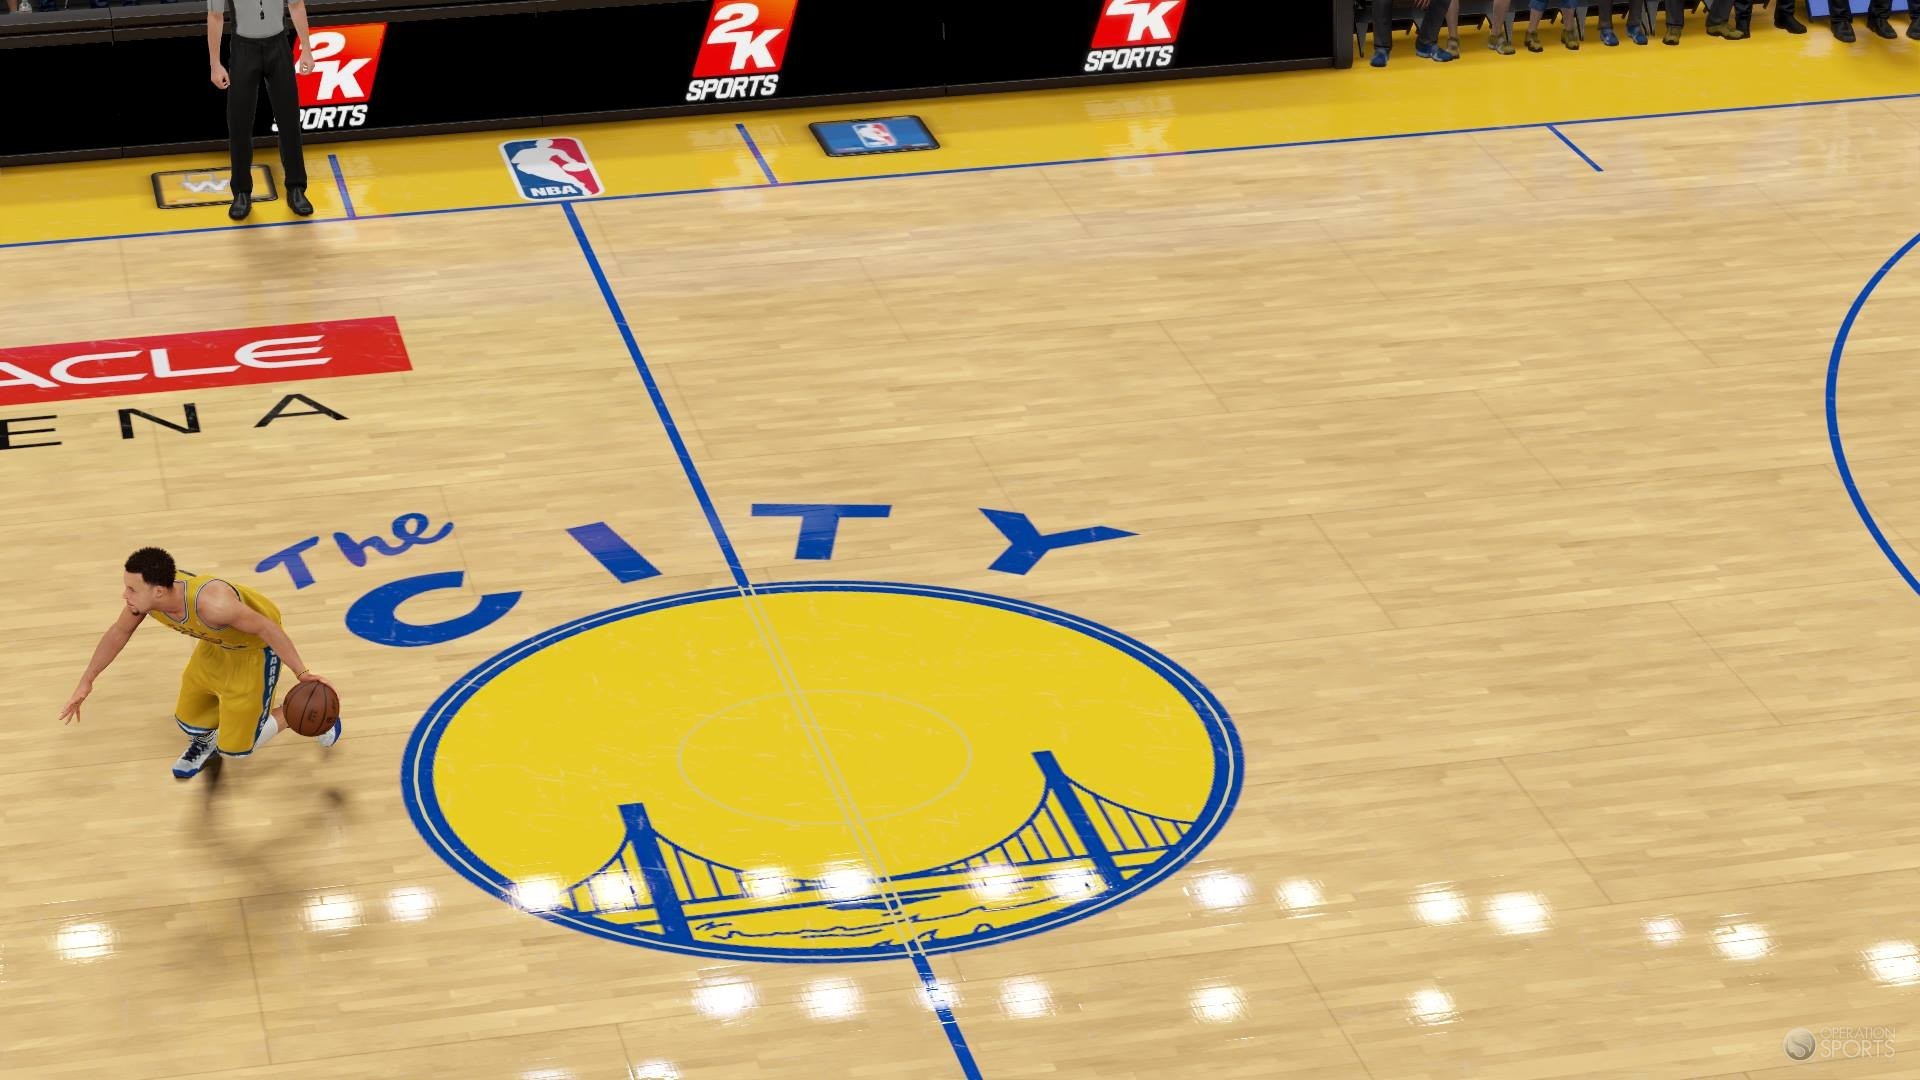 NBA 2K16 Adds The City Alternate Floor For the Golden State Warriors